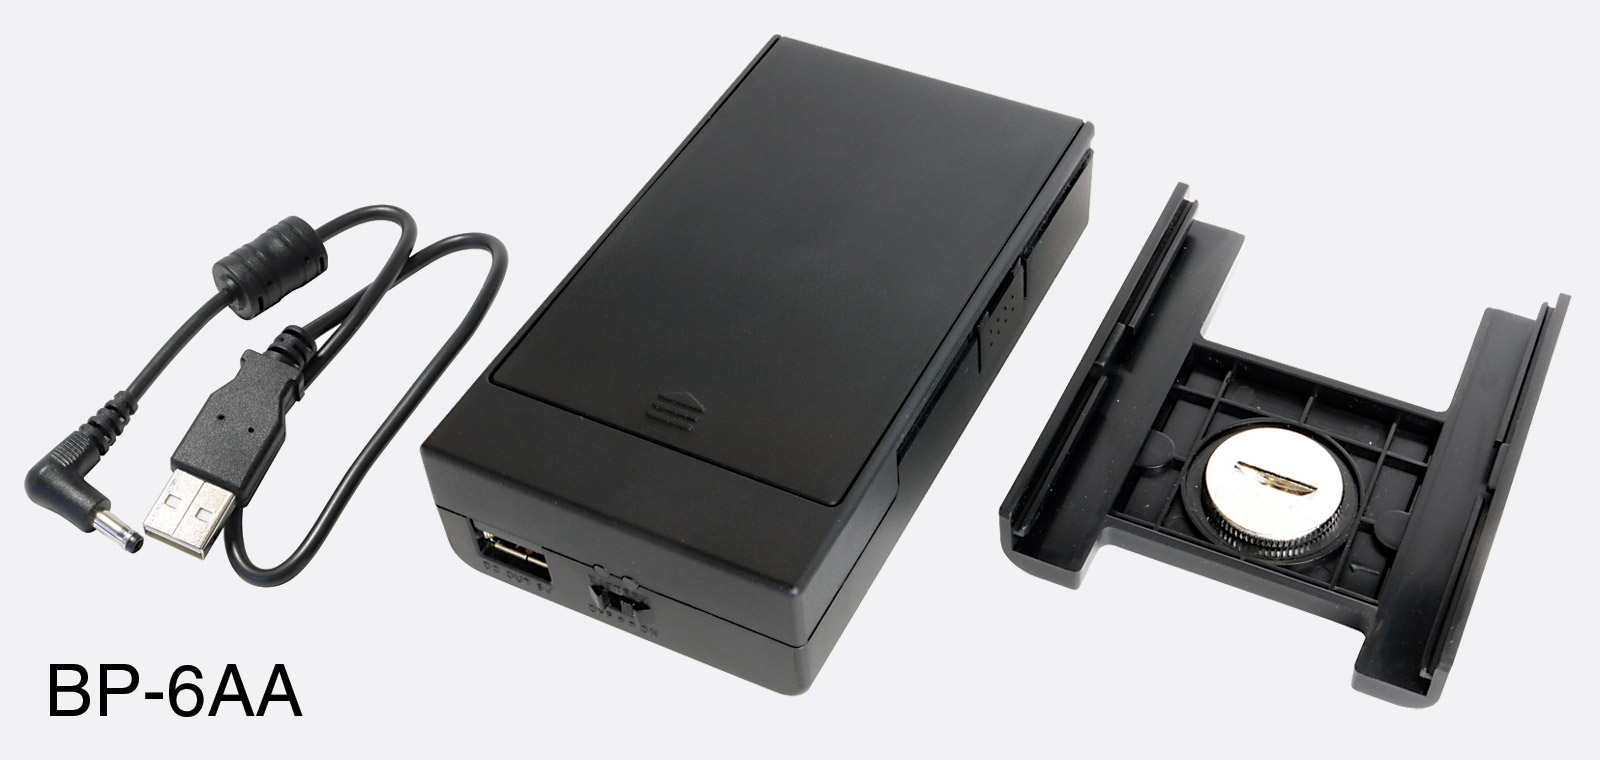 TASCAM BP-6AA EXTERNAL BATTERY PACK For DR-40, DR-100, DR-05, DR-07 MKII  portable recorders